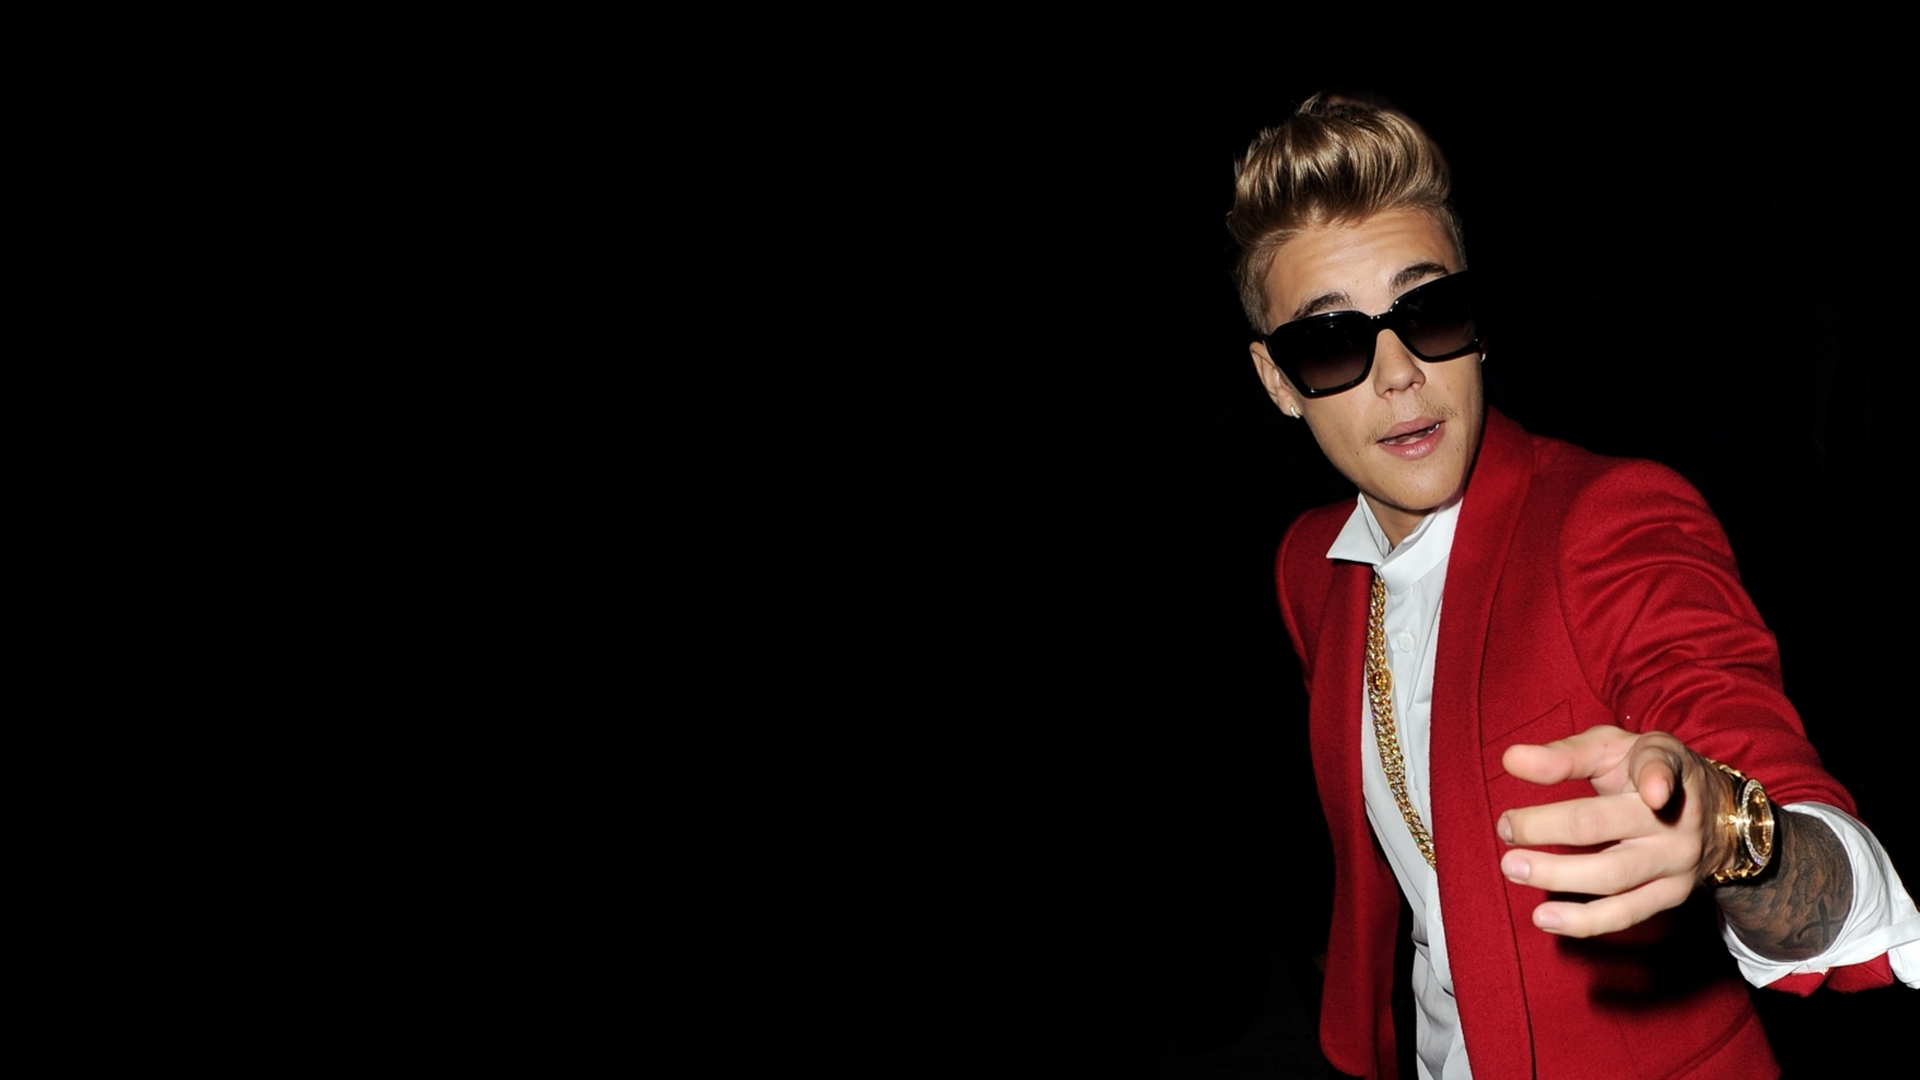 Justin Bieber Wallpaper Top Collections Of Pictures Image